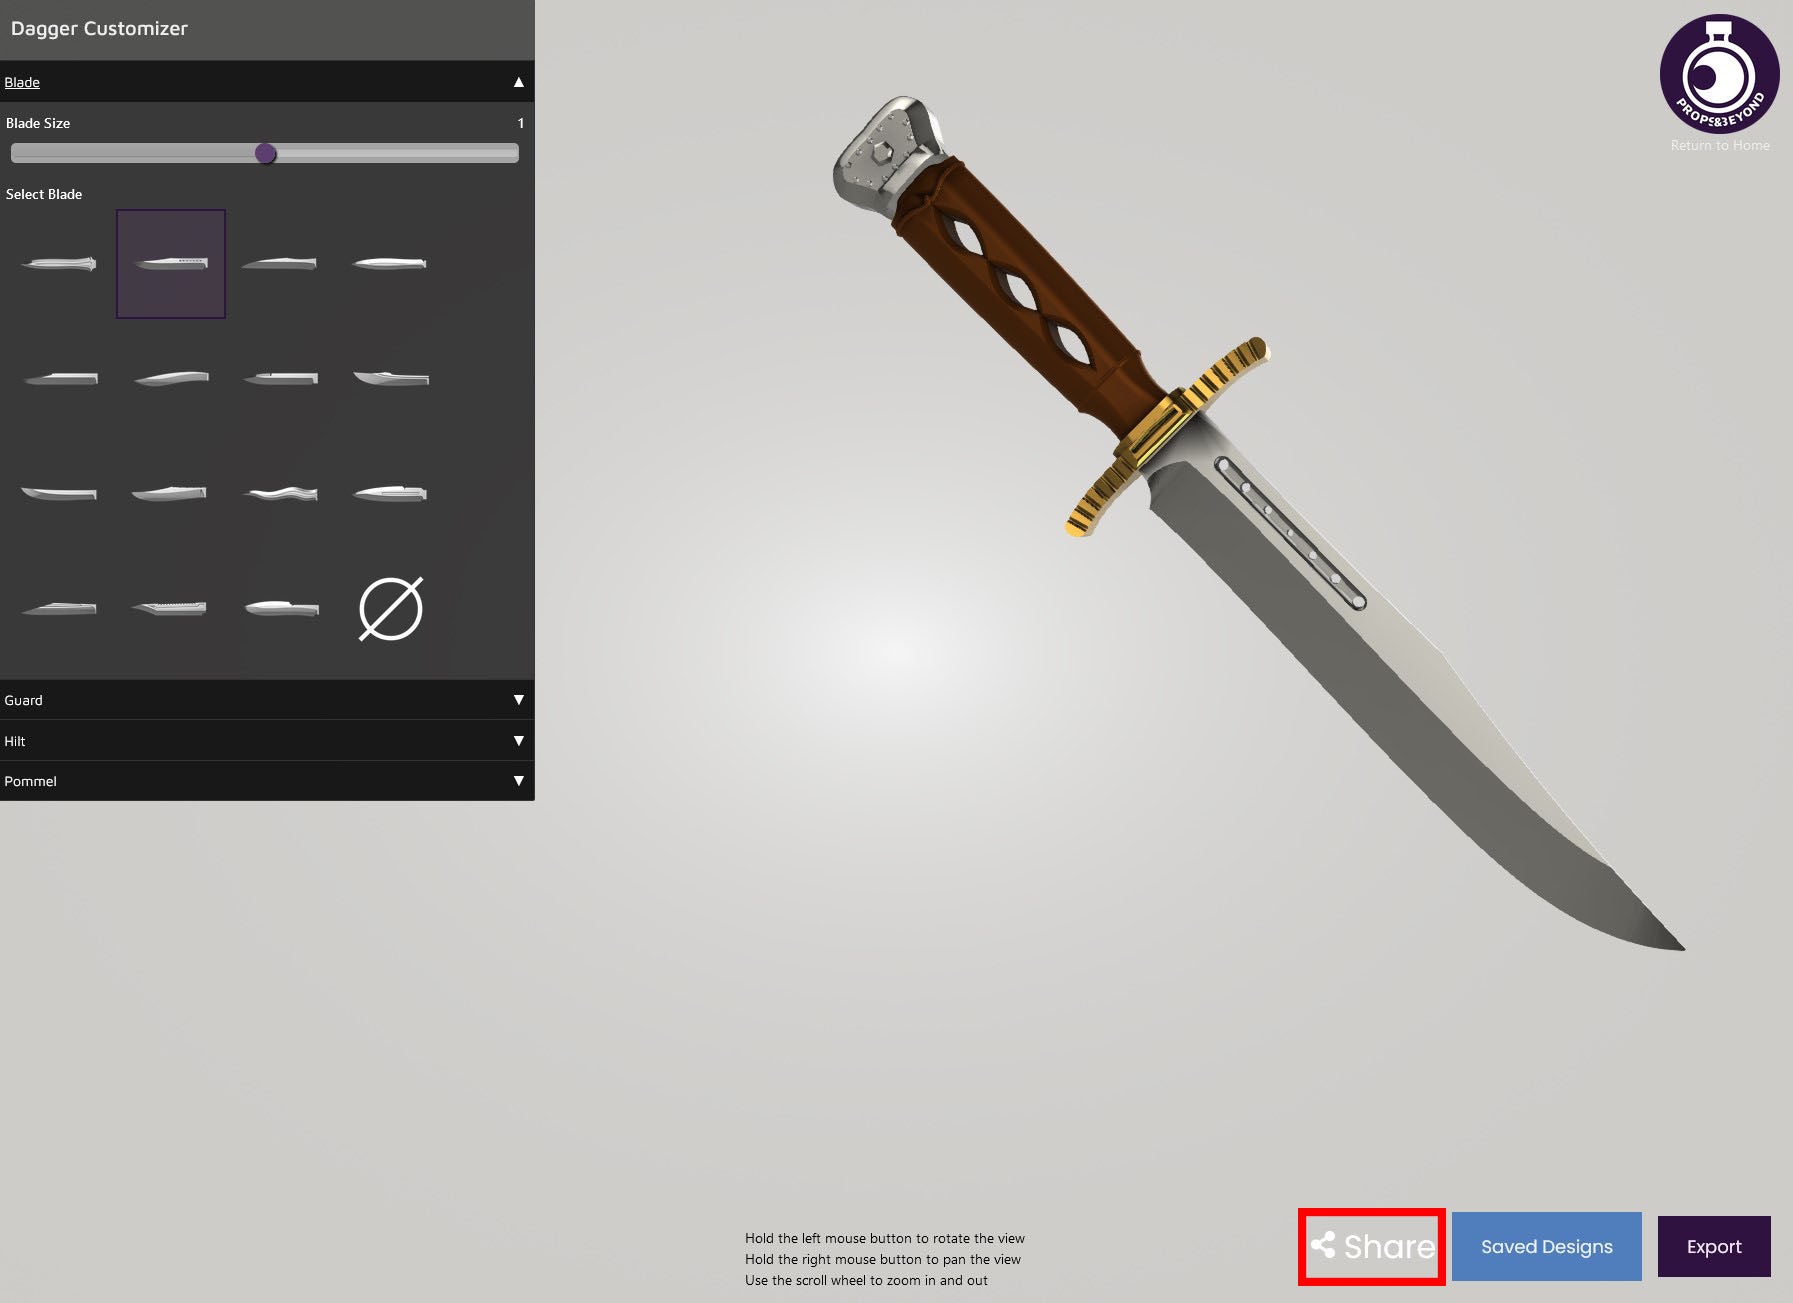 Dagger Customizer by Props & Beyond, Share button on bottom right highlighted